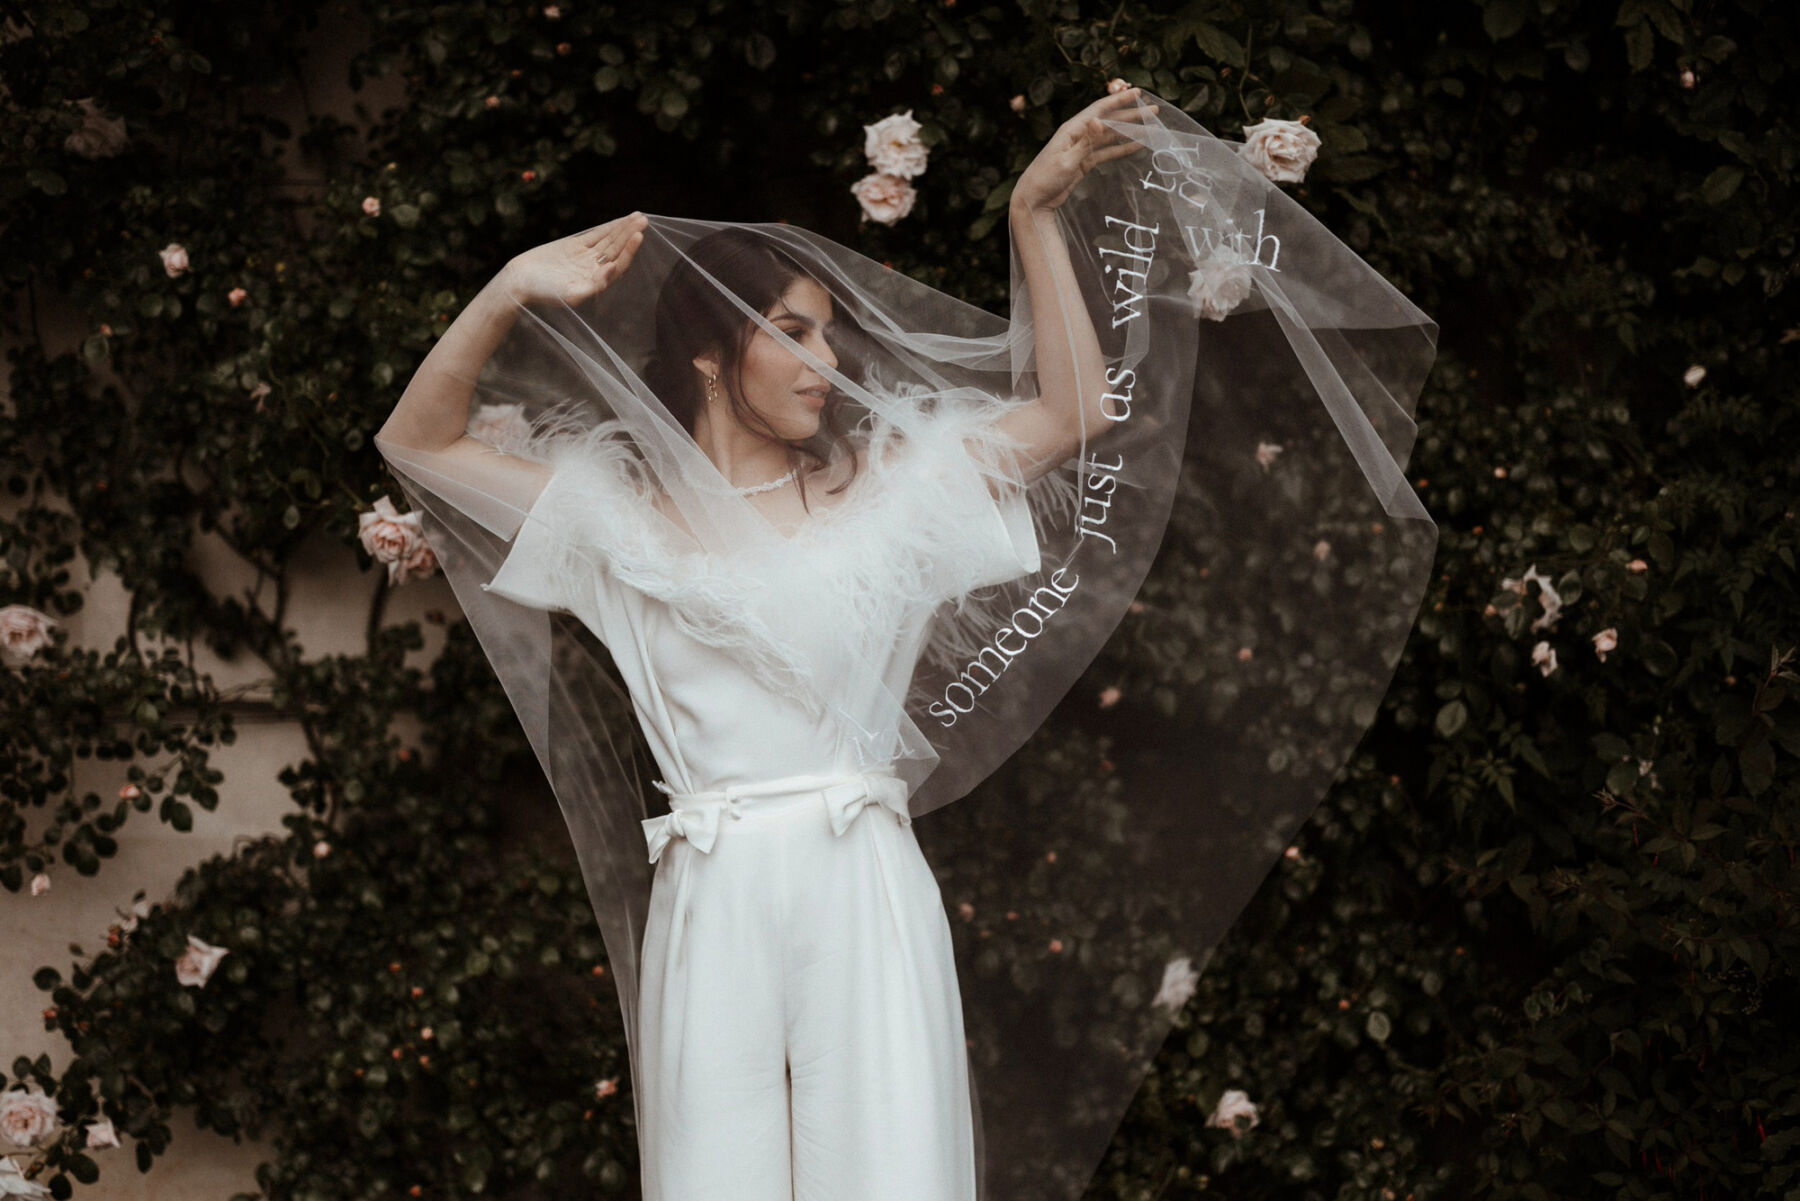 Wilden London bridal trousers + embroidered veil by Rebecca Anne Designs